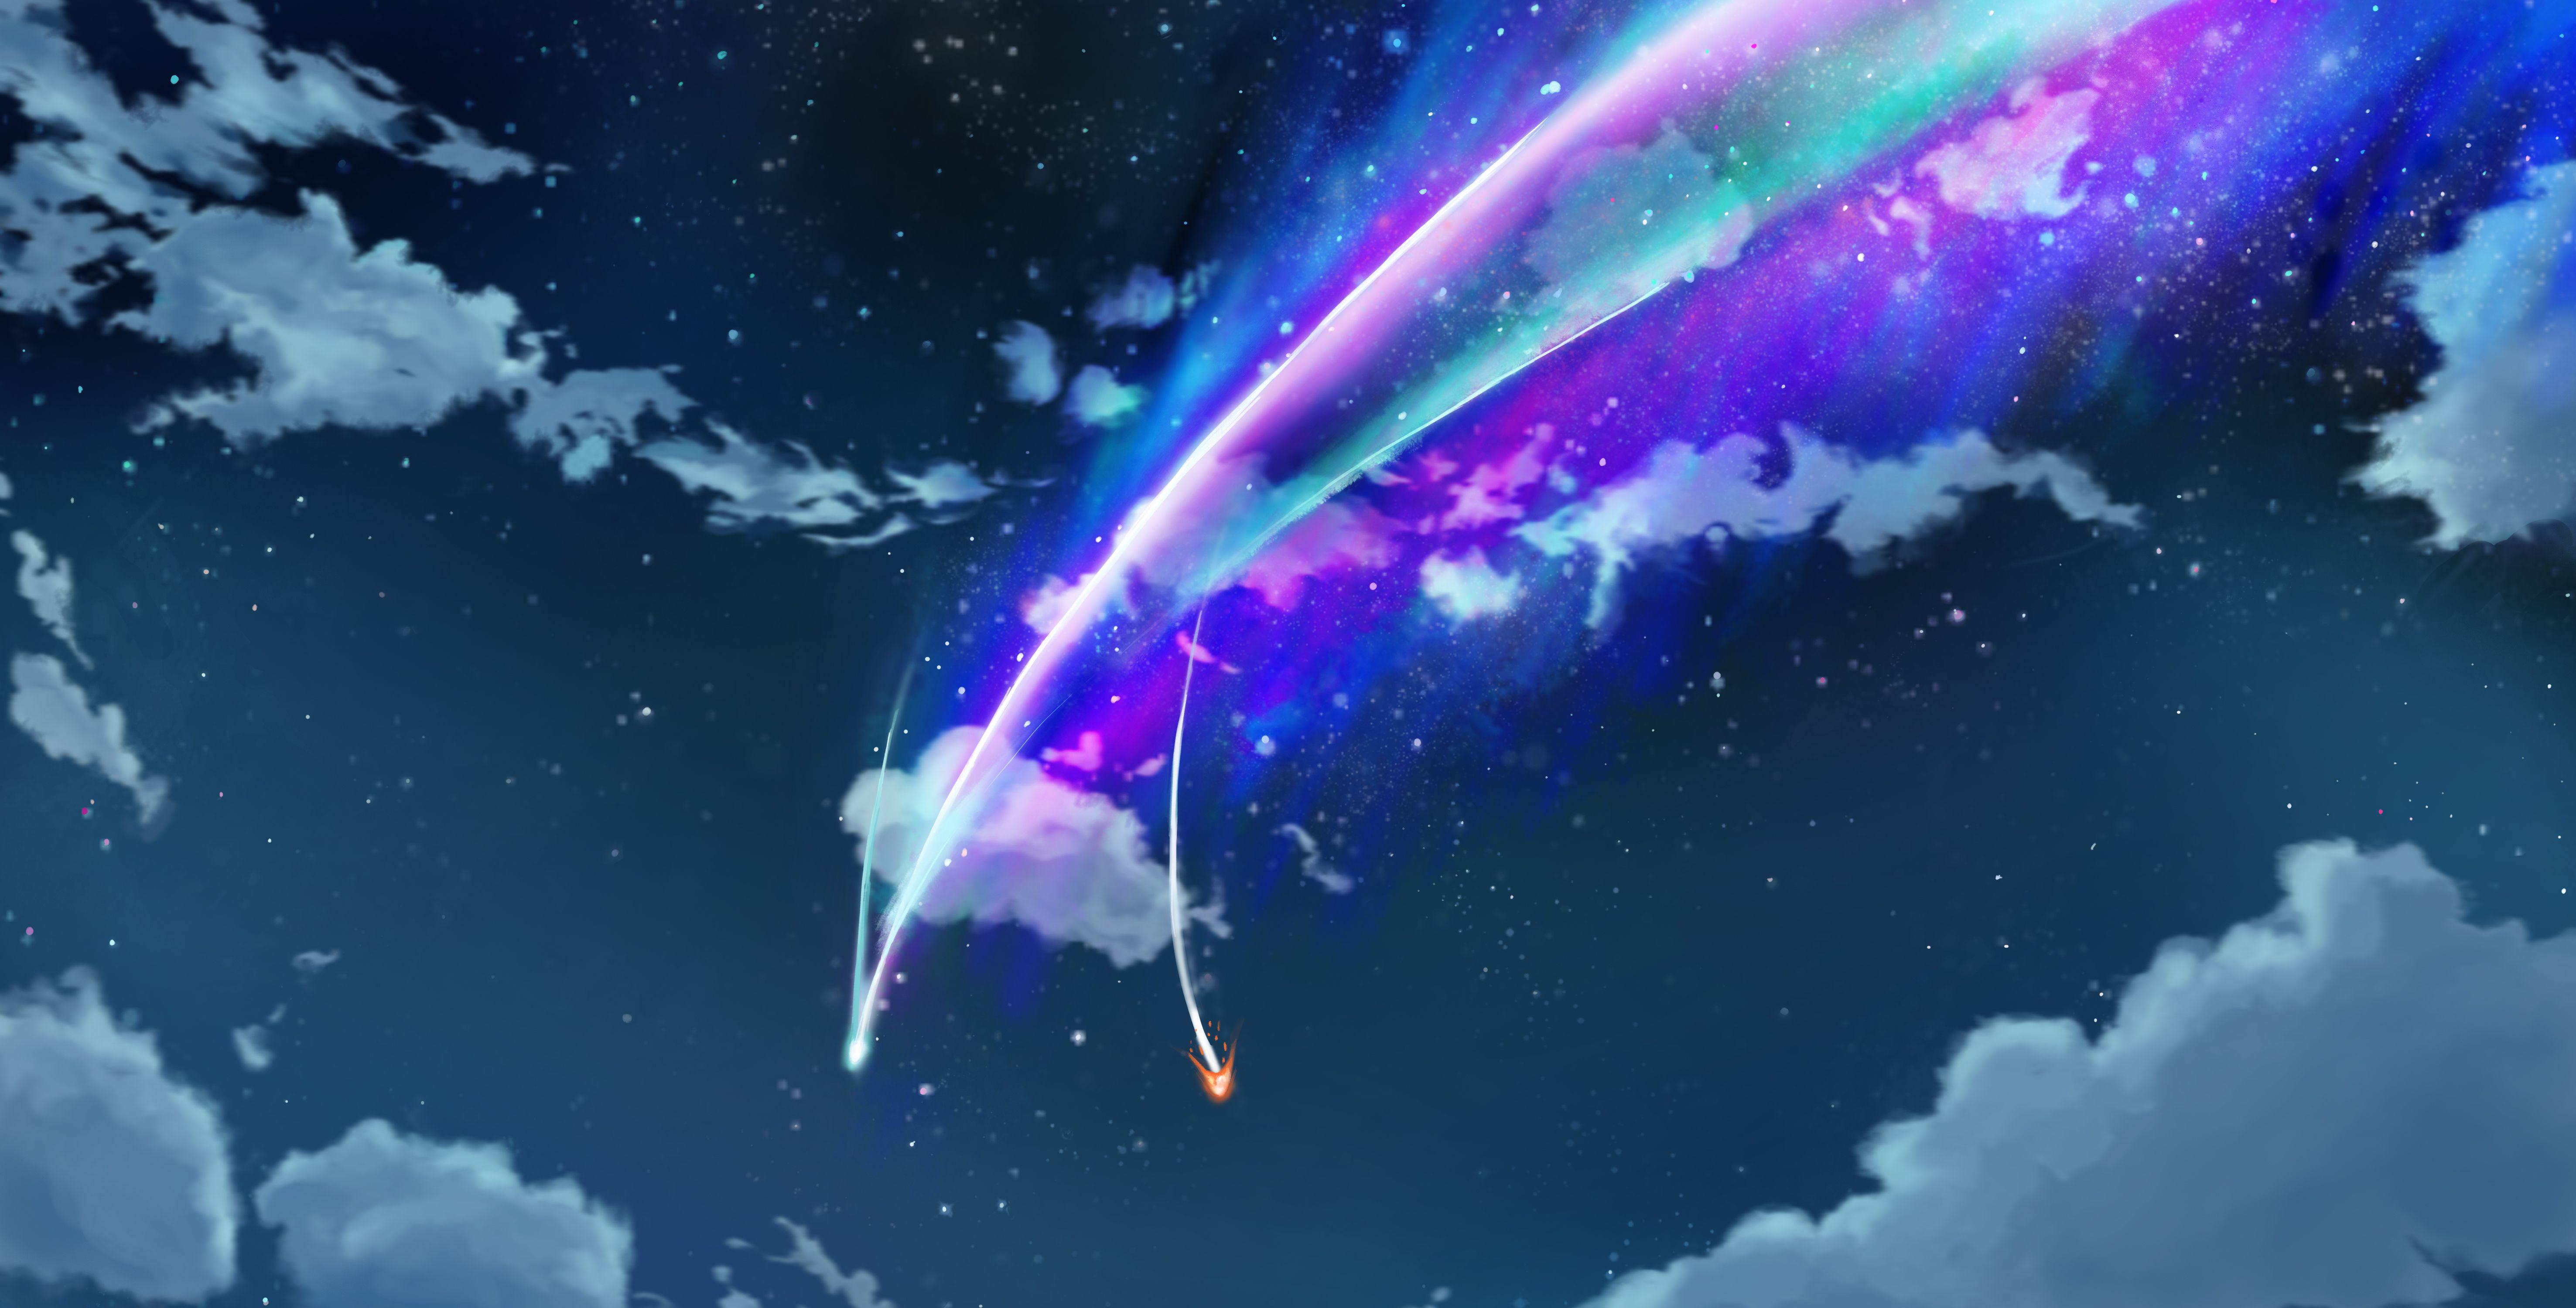 Your Name 4K Uhd Download - Colaboratory